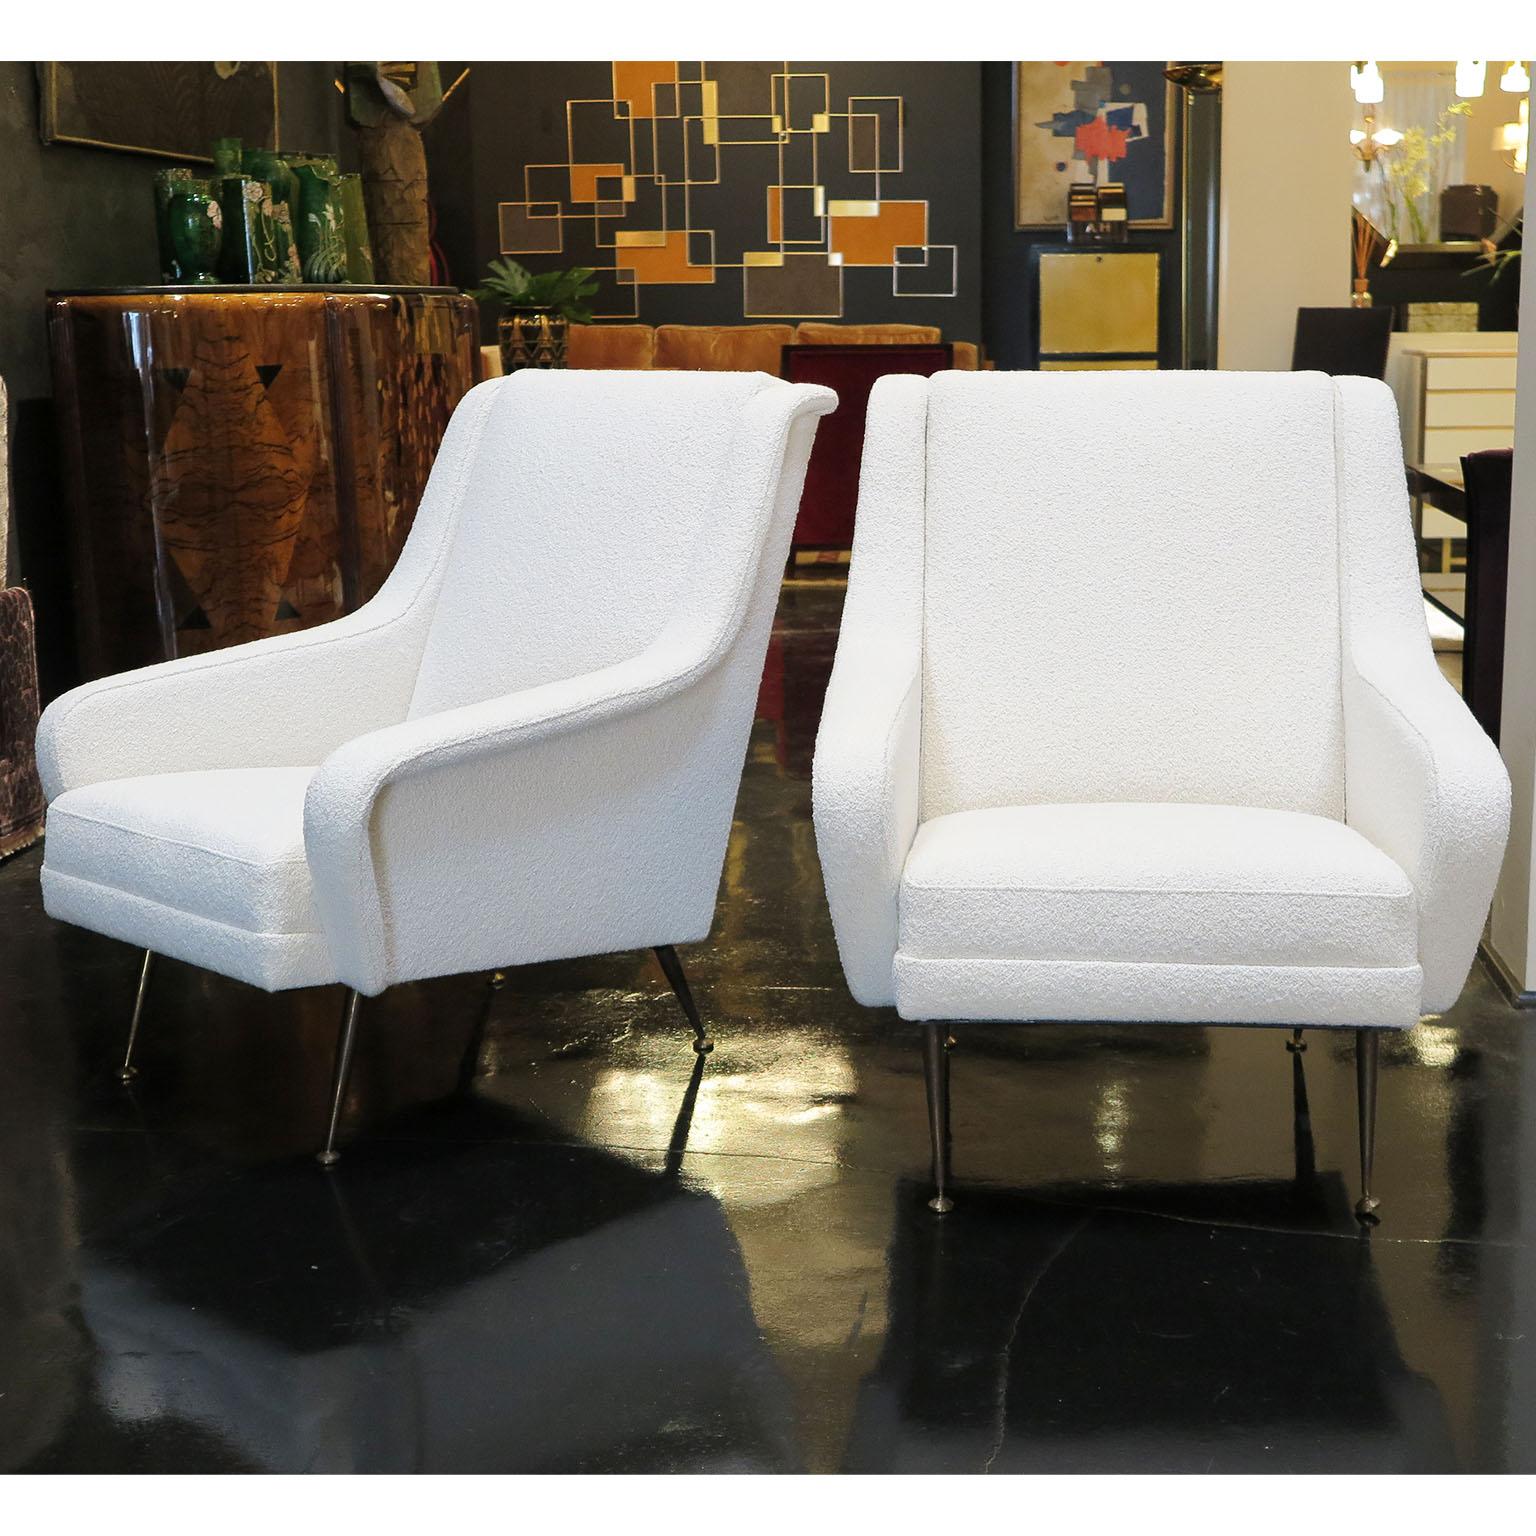 These sleek Mid-Century Modern lounge chairs from Italy by Carlo de Carli feature angled arms and distressed brass tapered legs. Upholstered in an ivory Boucle fabric allows these chairs to be timeless in any interior.